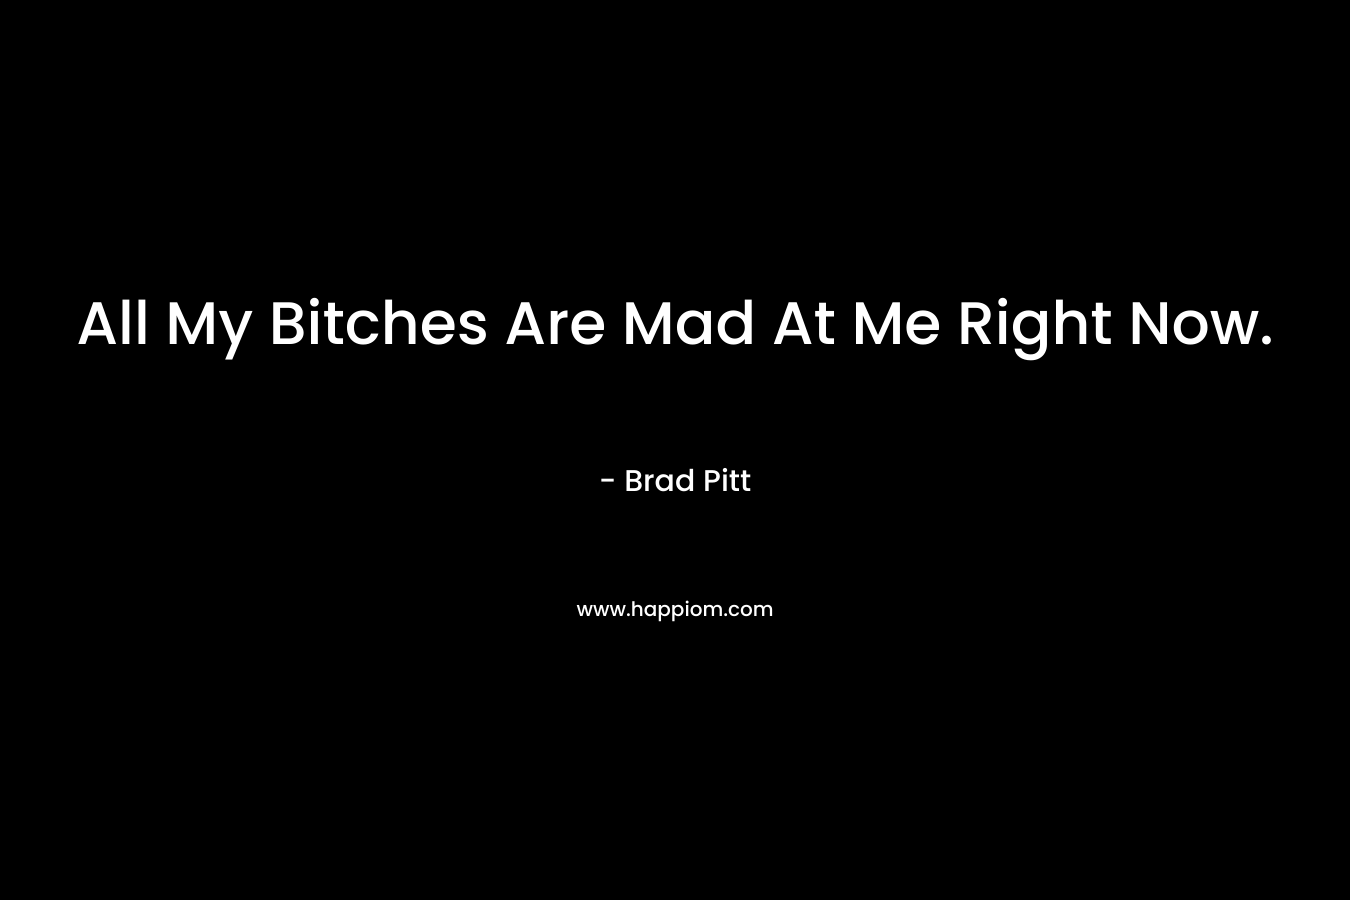 All My Bitches Are Mad At Me Right Now. – Brad Pitt